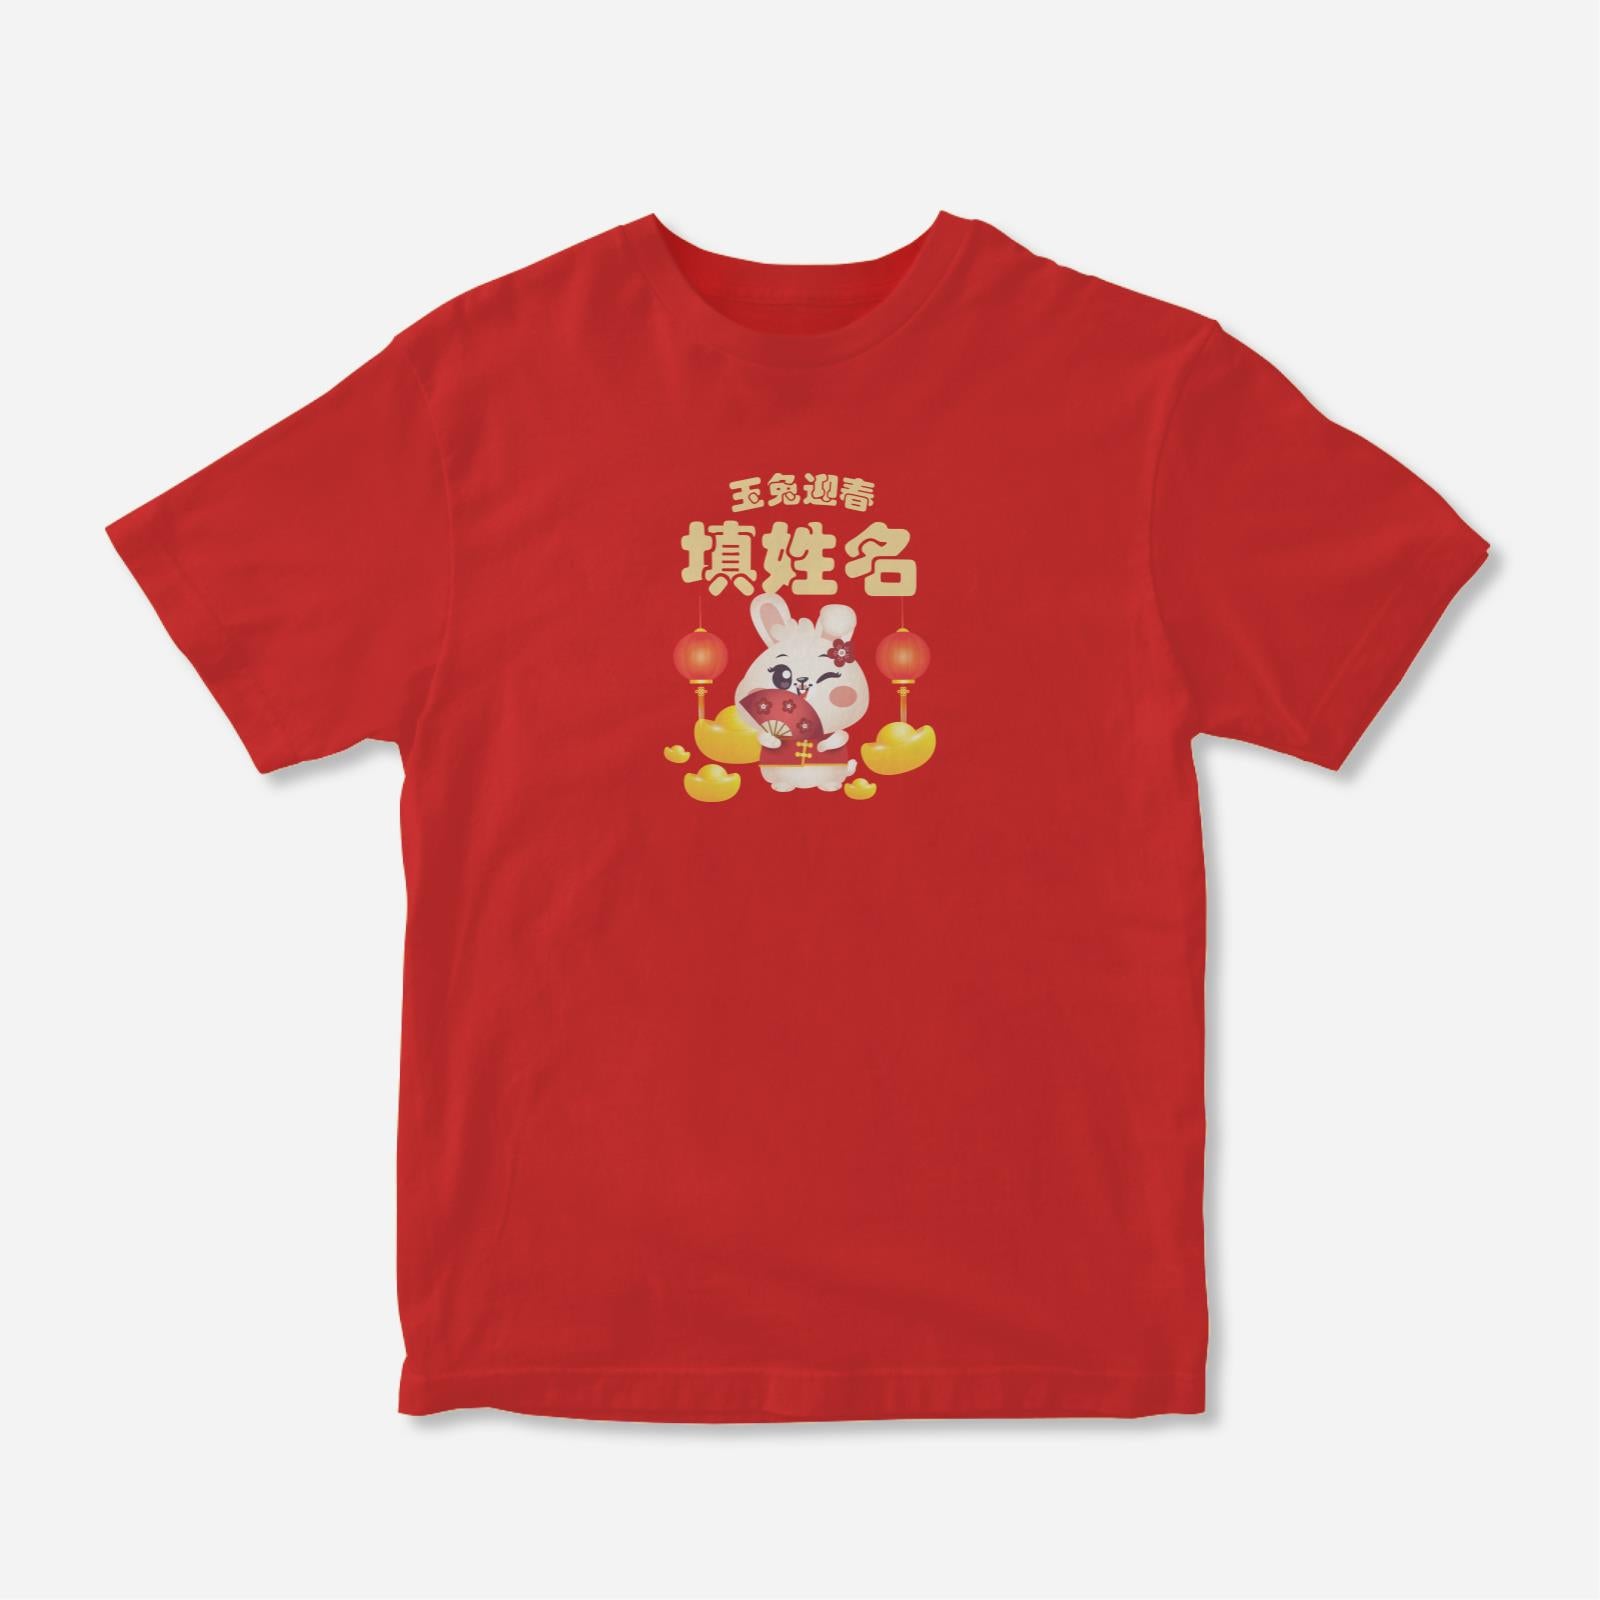 Cny Rabbit Family - Mommy Rabbit Kids Tee Shirt with Chinese Personalization